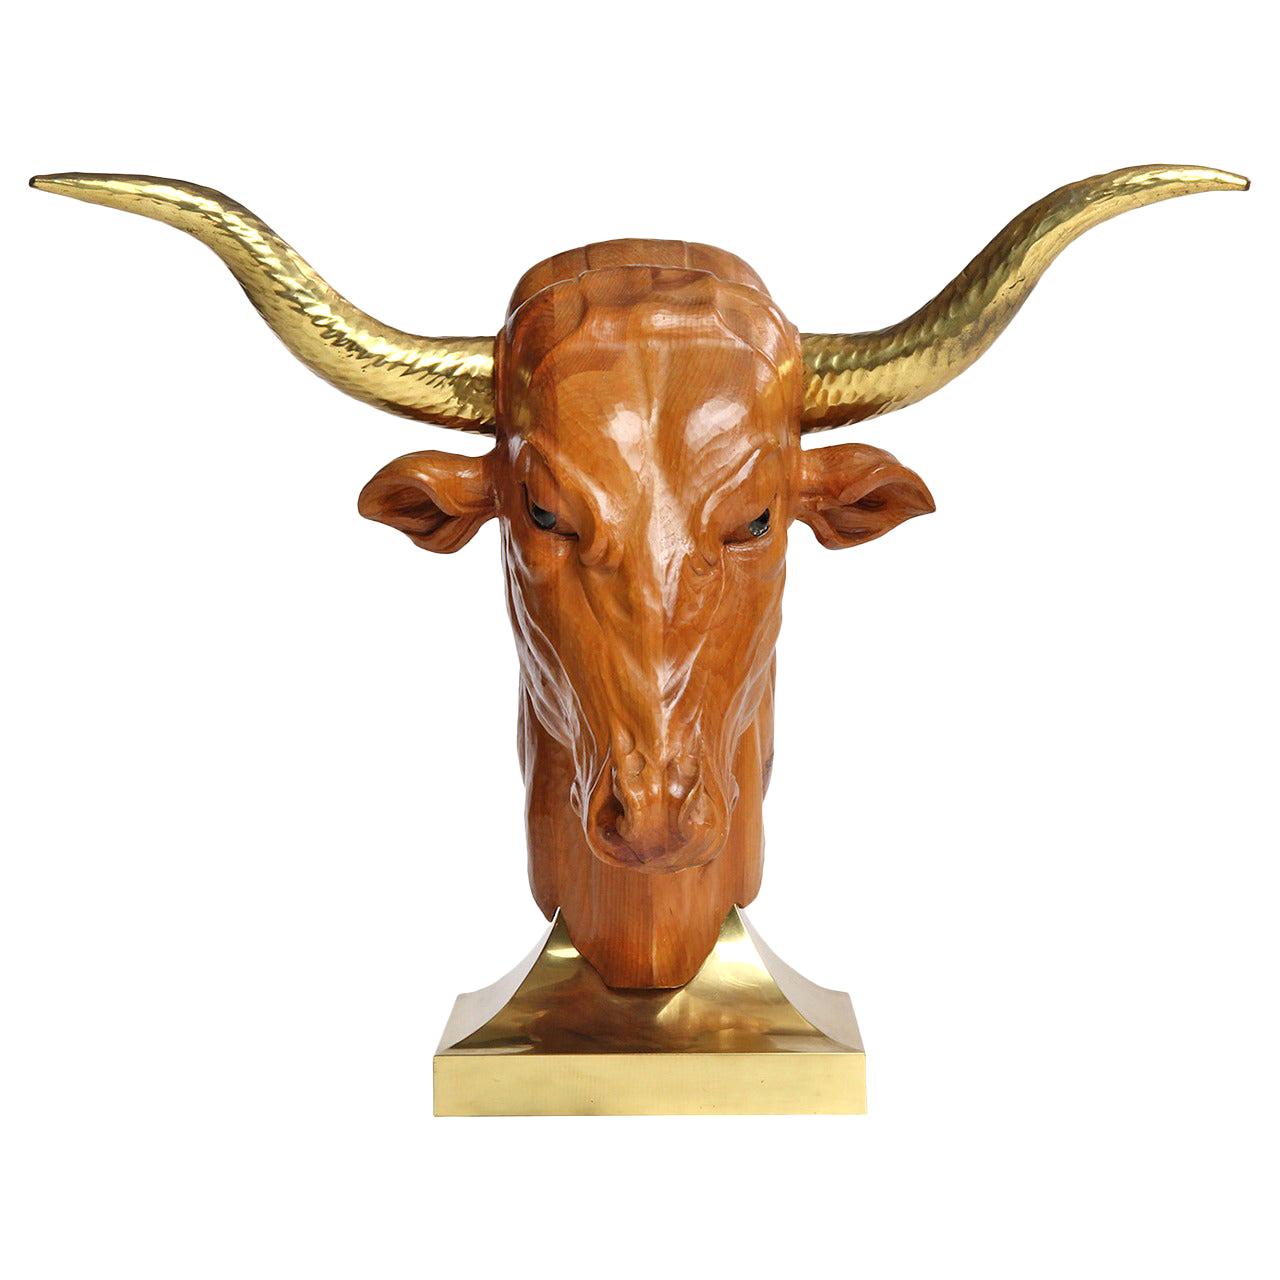 Carved Bull Sculpture